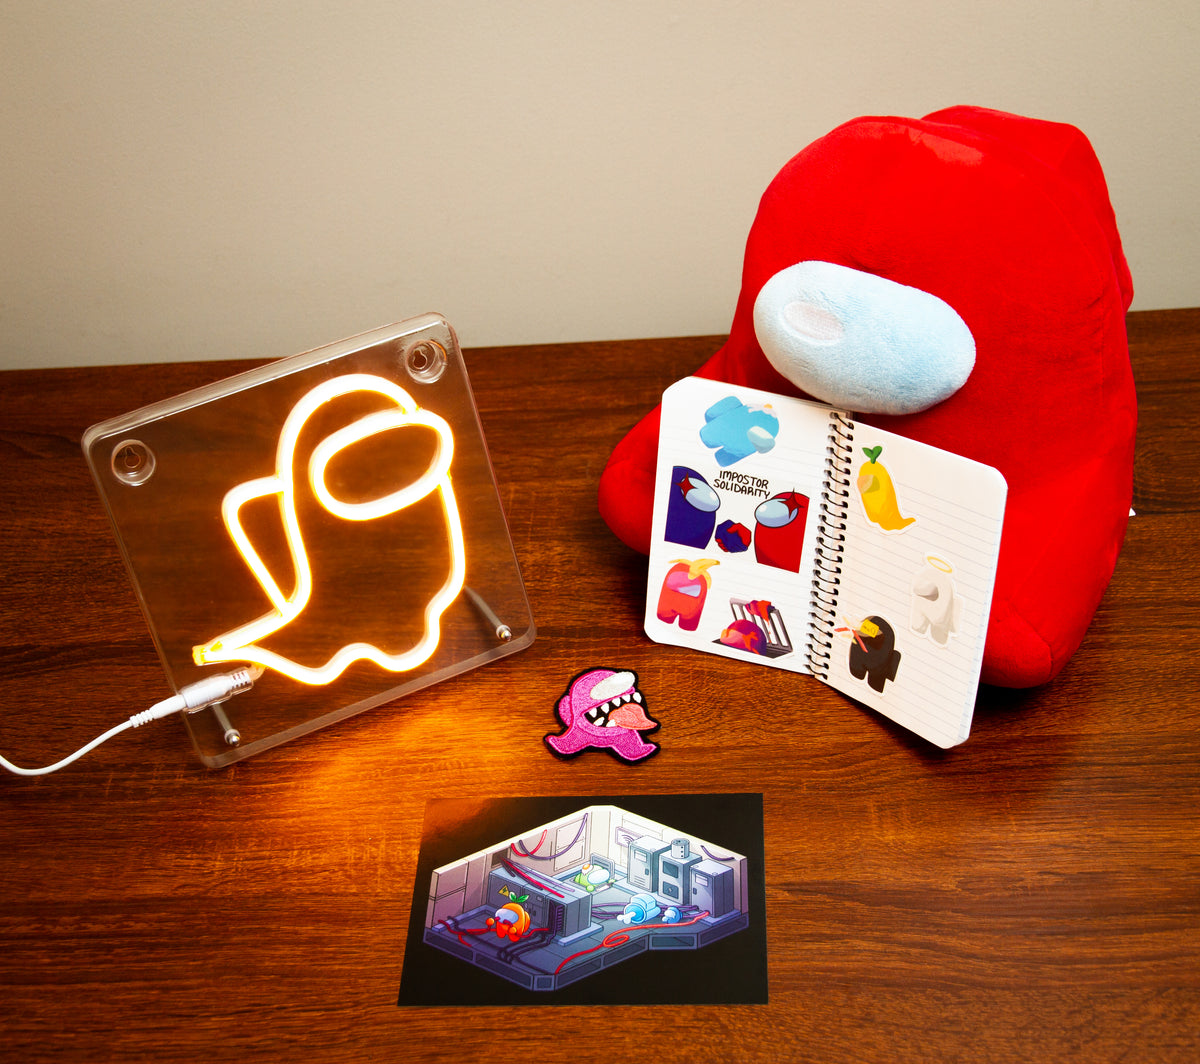 The entire Among Us Murder Room Artist Alley bundle of items arranged on a wooden desktop. The Ghost Crewmate LED is lit up on the left, a notebook covered in Kuuji stickers and one bonus sticker is on the right, and in the center lying flat is the purple Imposter patch and the Skeld Engineering print.